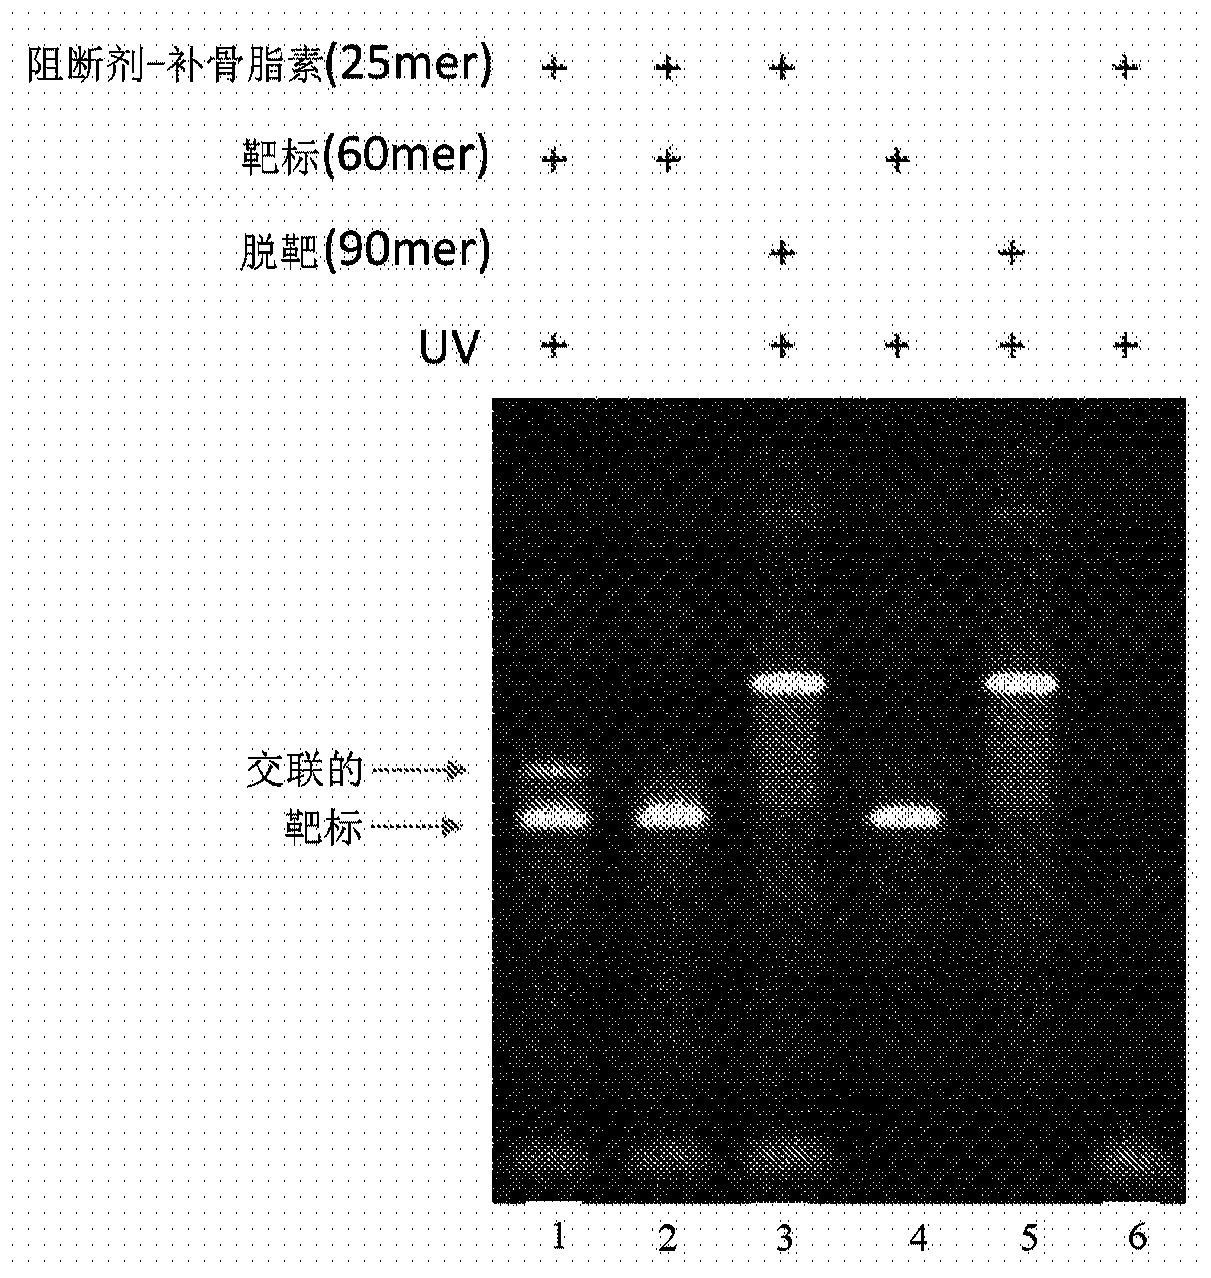 Selective enrichment of population of DNA in mixed DNA sample through targeted suppression of DNA amplification